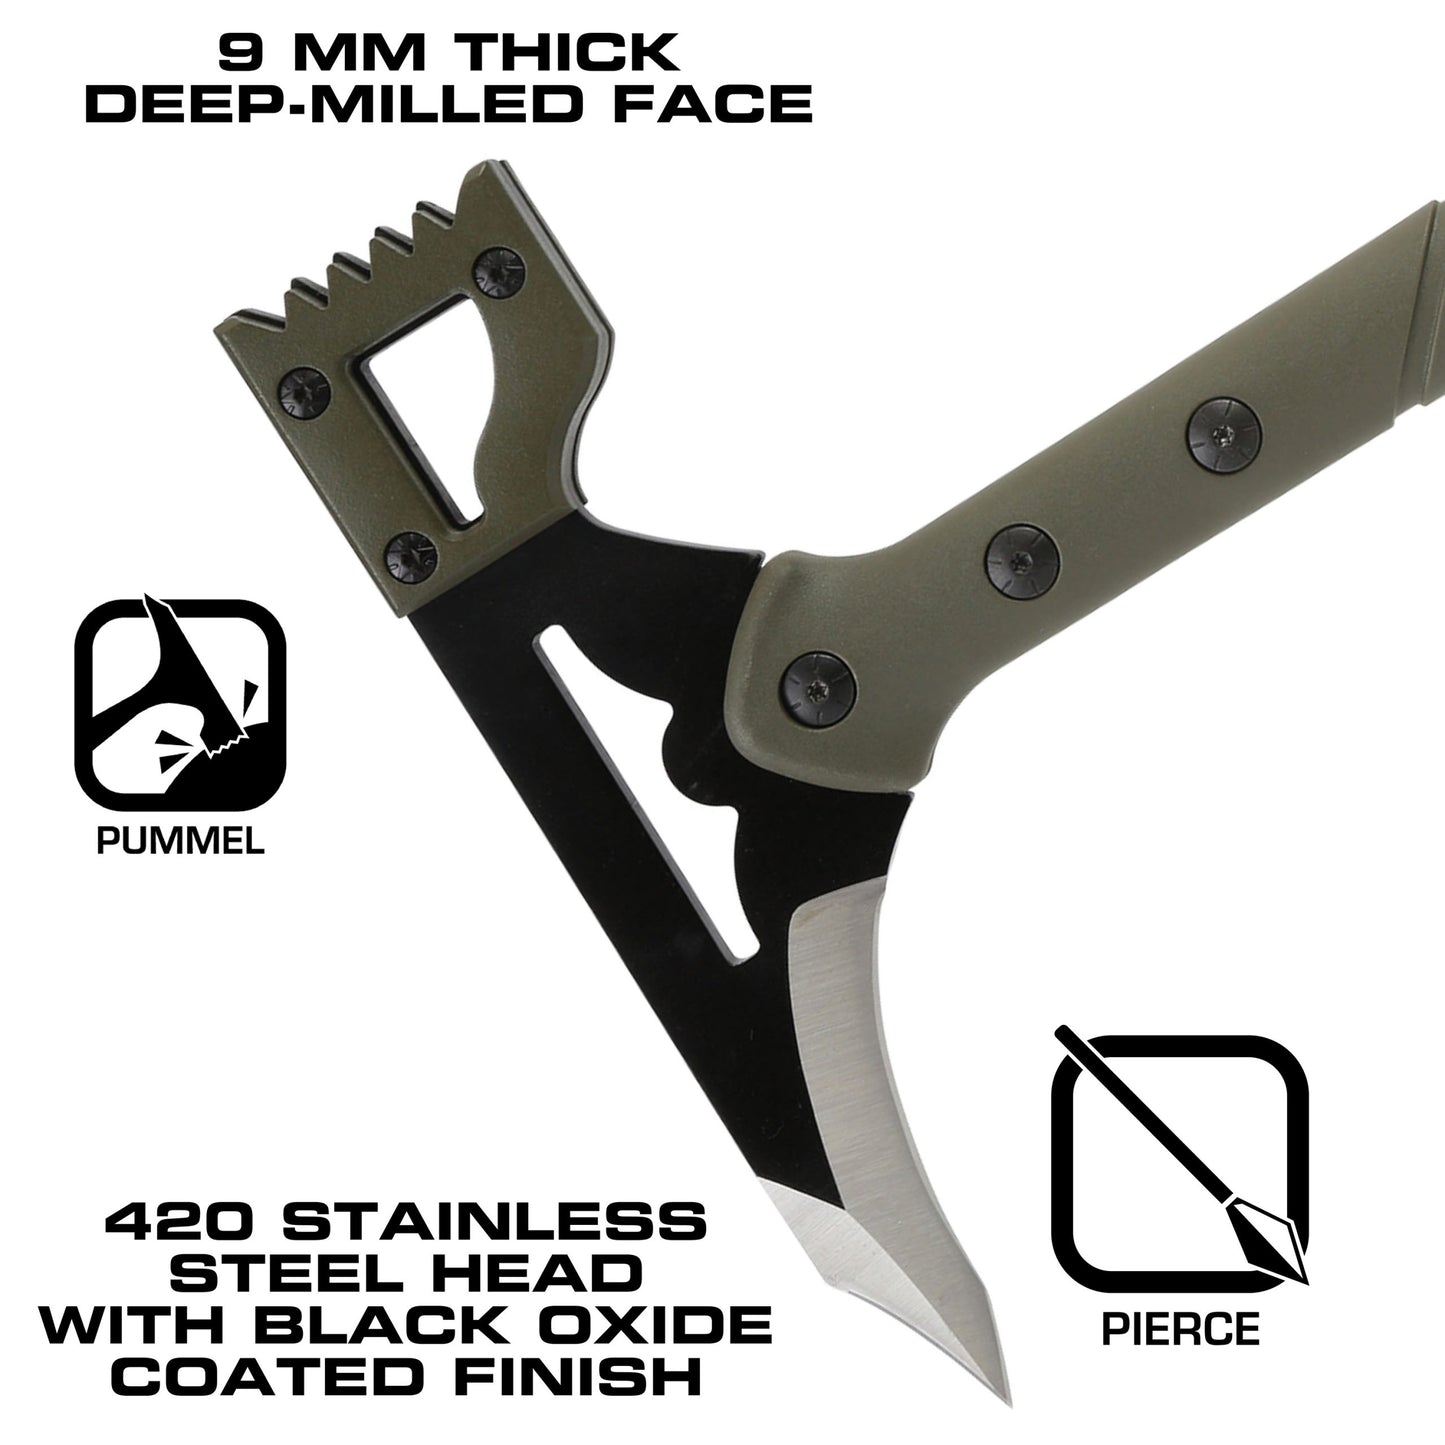 Channel your inner  warrior  with  the  superbly crafted Reapr Battle Hammer. The head features a destructive deep-milled  hammer face that will  demolish  and pummel with ferocious efficiency as well as a sharp spiked blade for extreme  piercing. www.defenceqstore.com.au